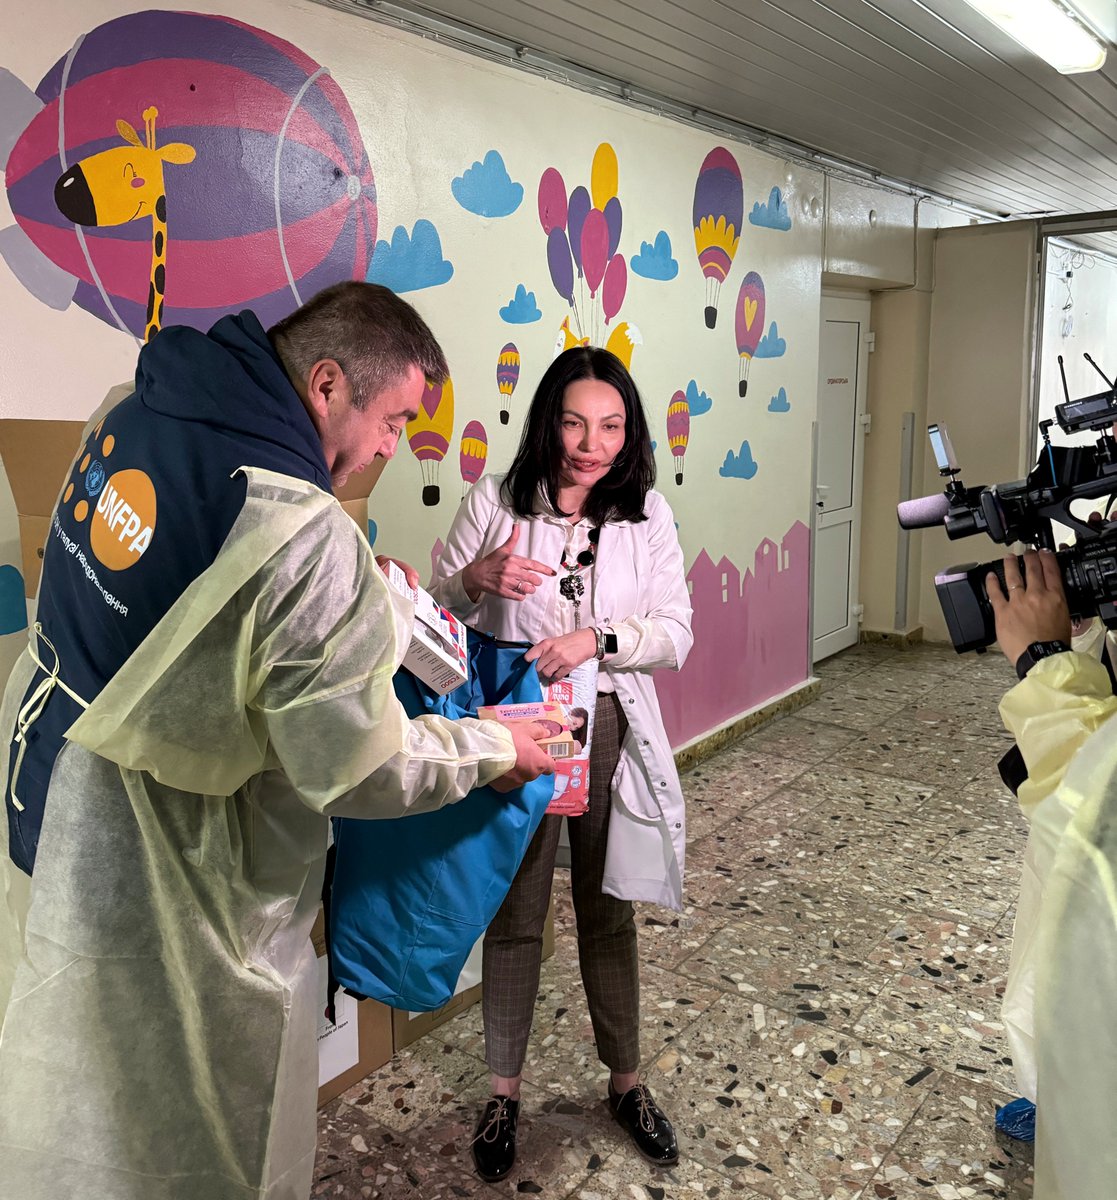 Today, we welcome @NHKWORLD_News to a hospital in Kyiv, where we’re providing crucial reproductive healthcare - as complications are being compounded during the ongoing war. With @JPEmbUA support,we're supplying essential aid to over 120 hospitals, assisting more than 235k people